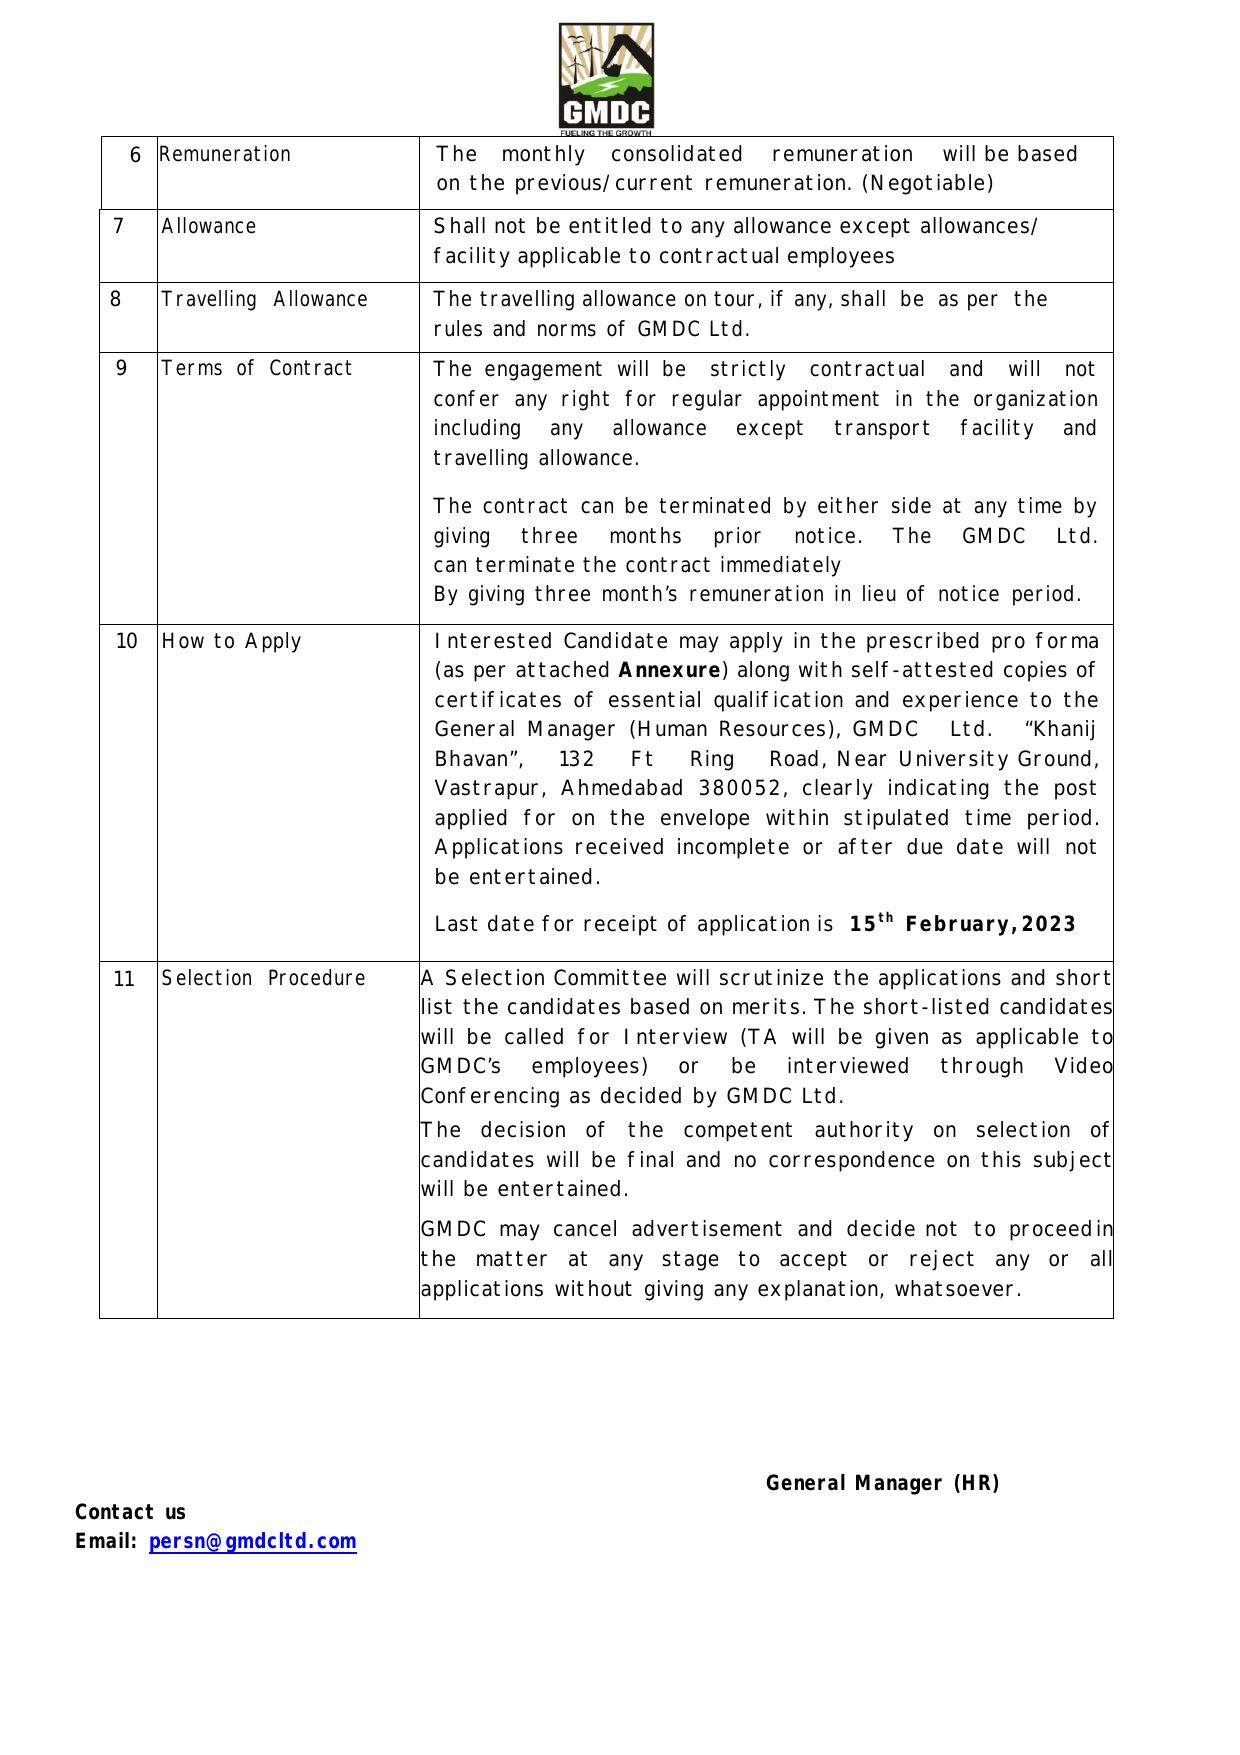 Gujarat Mineral Development Corporation (GMDC) Invites Application for 3 Assistant Manager Recruitment 2023 - Page 1